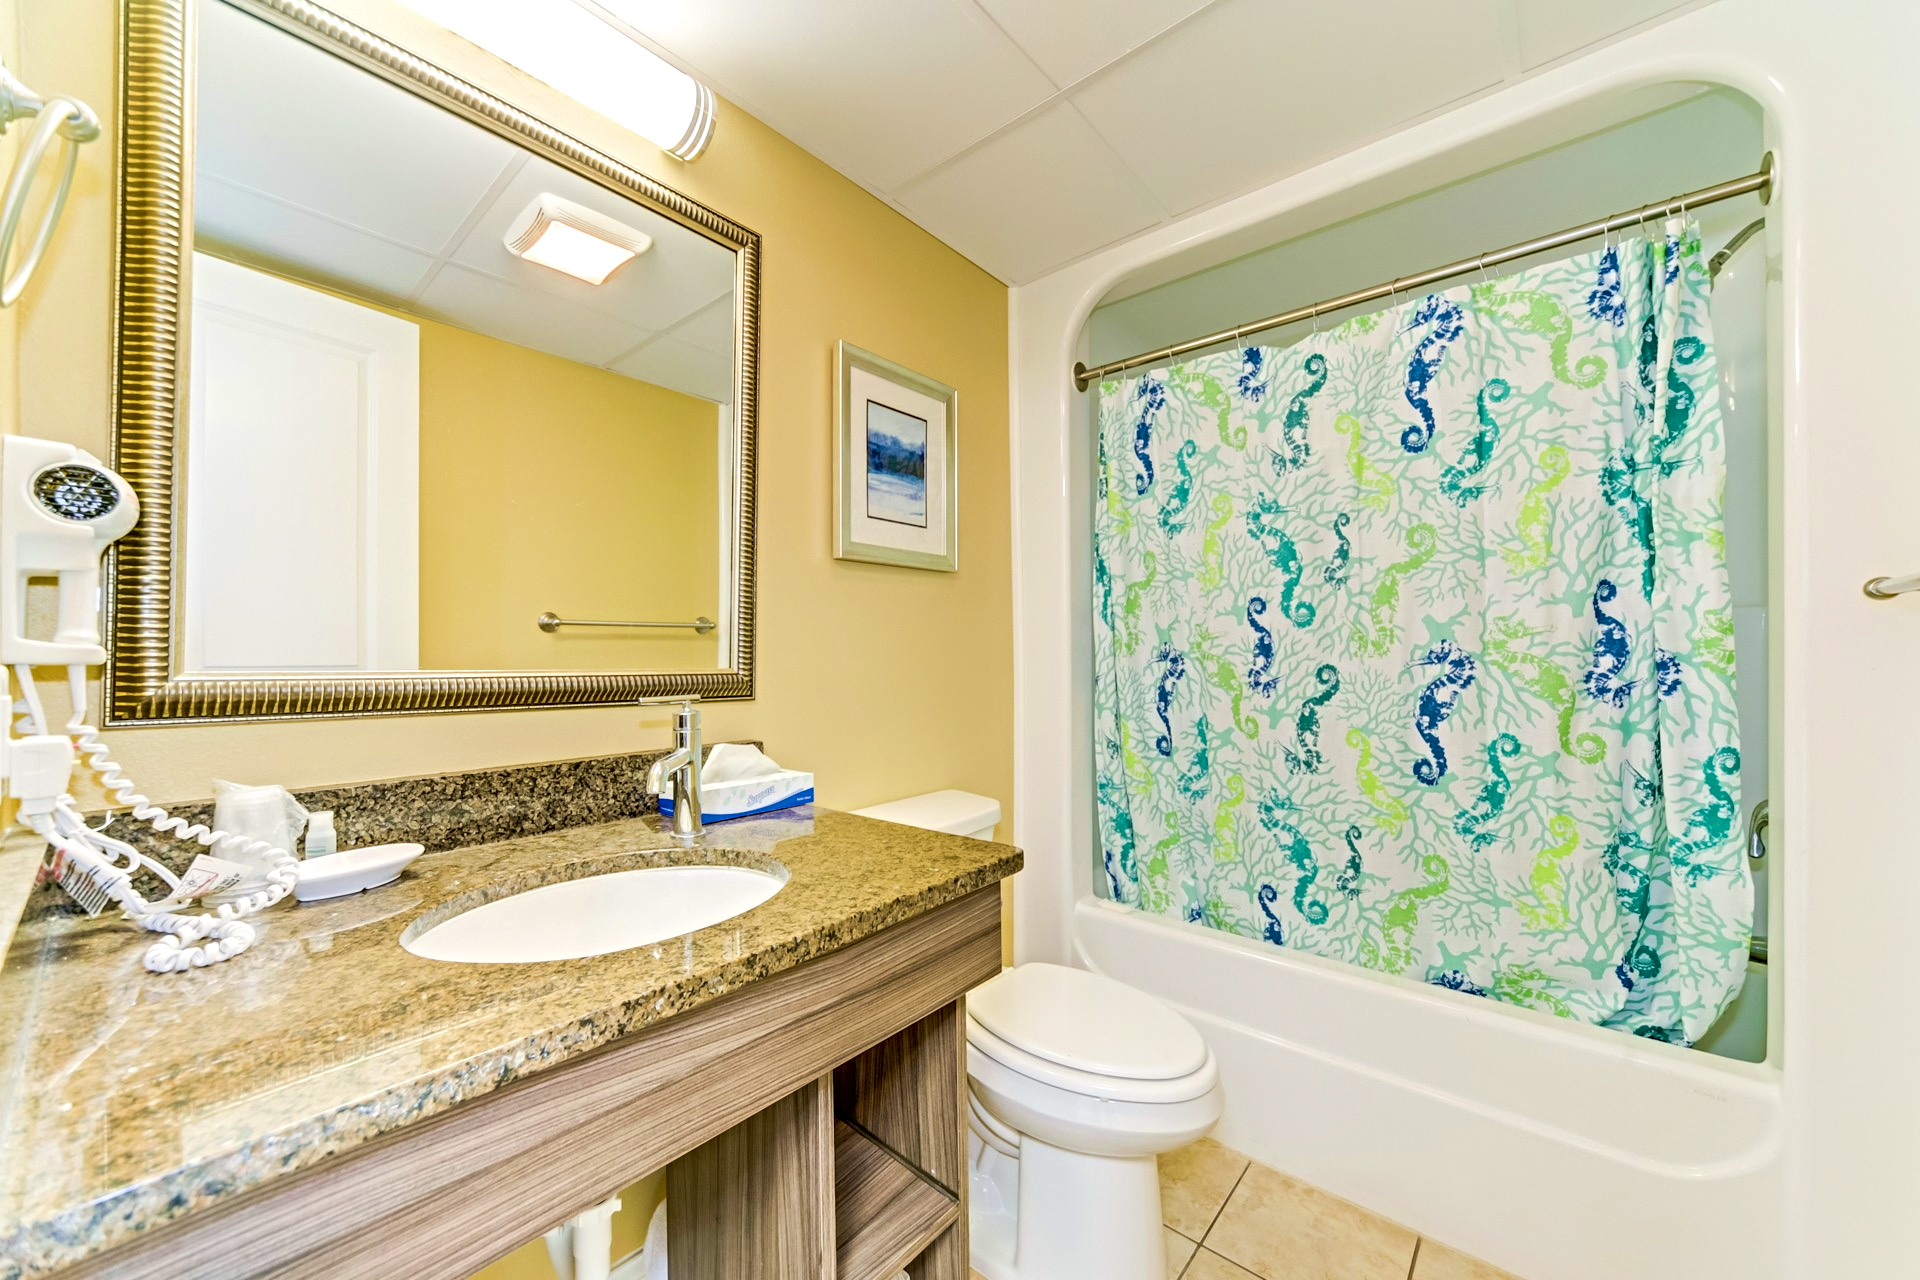 Bathroom of the Caravelle 525